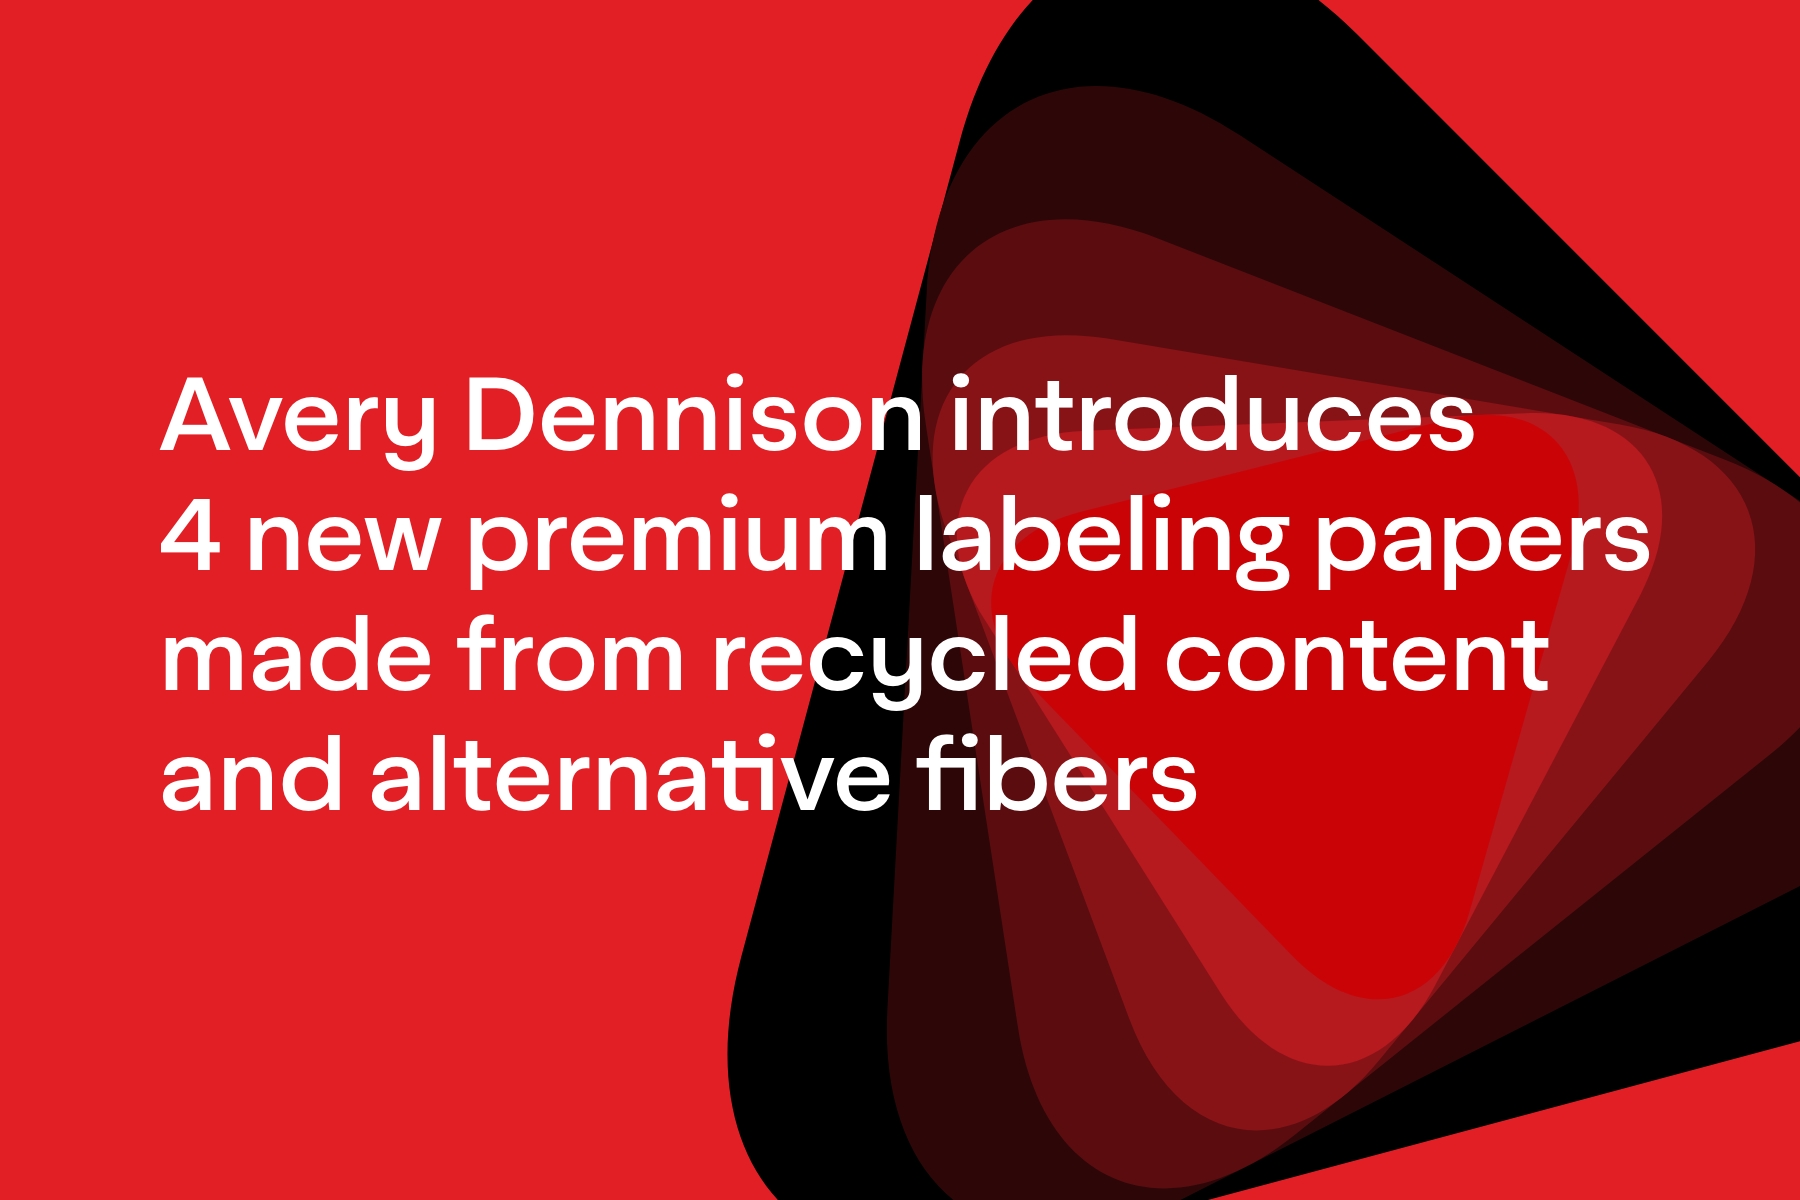 Avery Dennison introduces four new premium labeling papers made from recycled content and alternative fibers